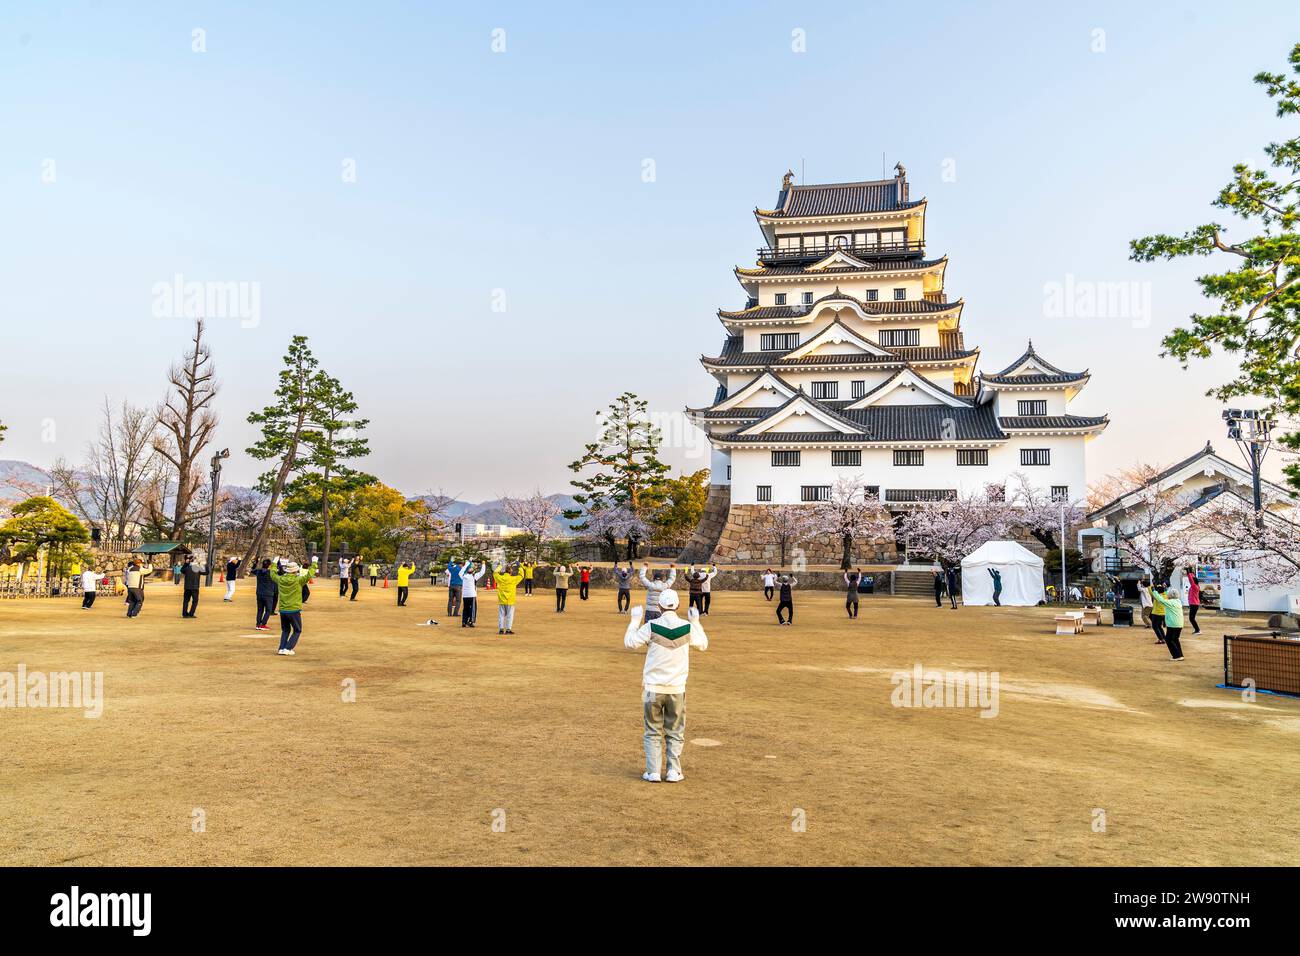 Fukuyama castle, Japan. Old people taking part in a group exercise session in front of the newly restored white borogata style keep just after sunrise Stock Photo